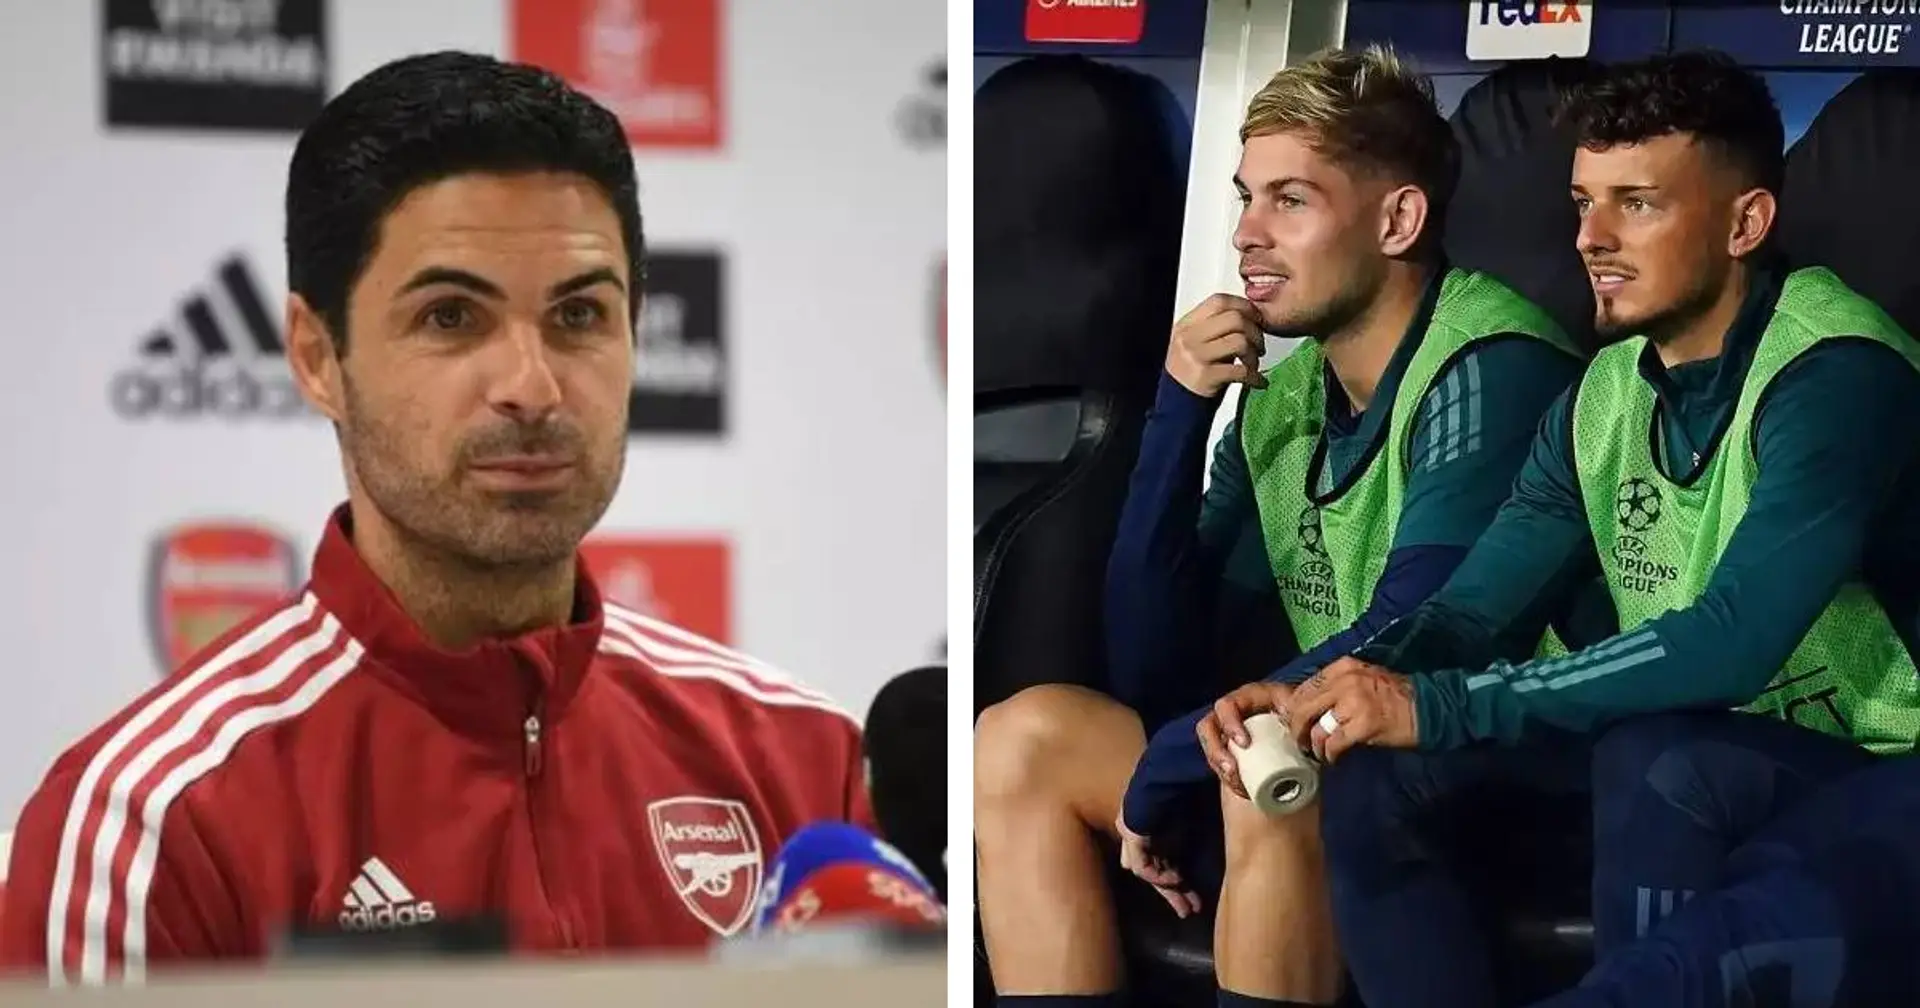 'Every player can't play every game': Arteta sends stern message to Arsenal bench